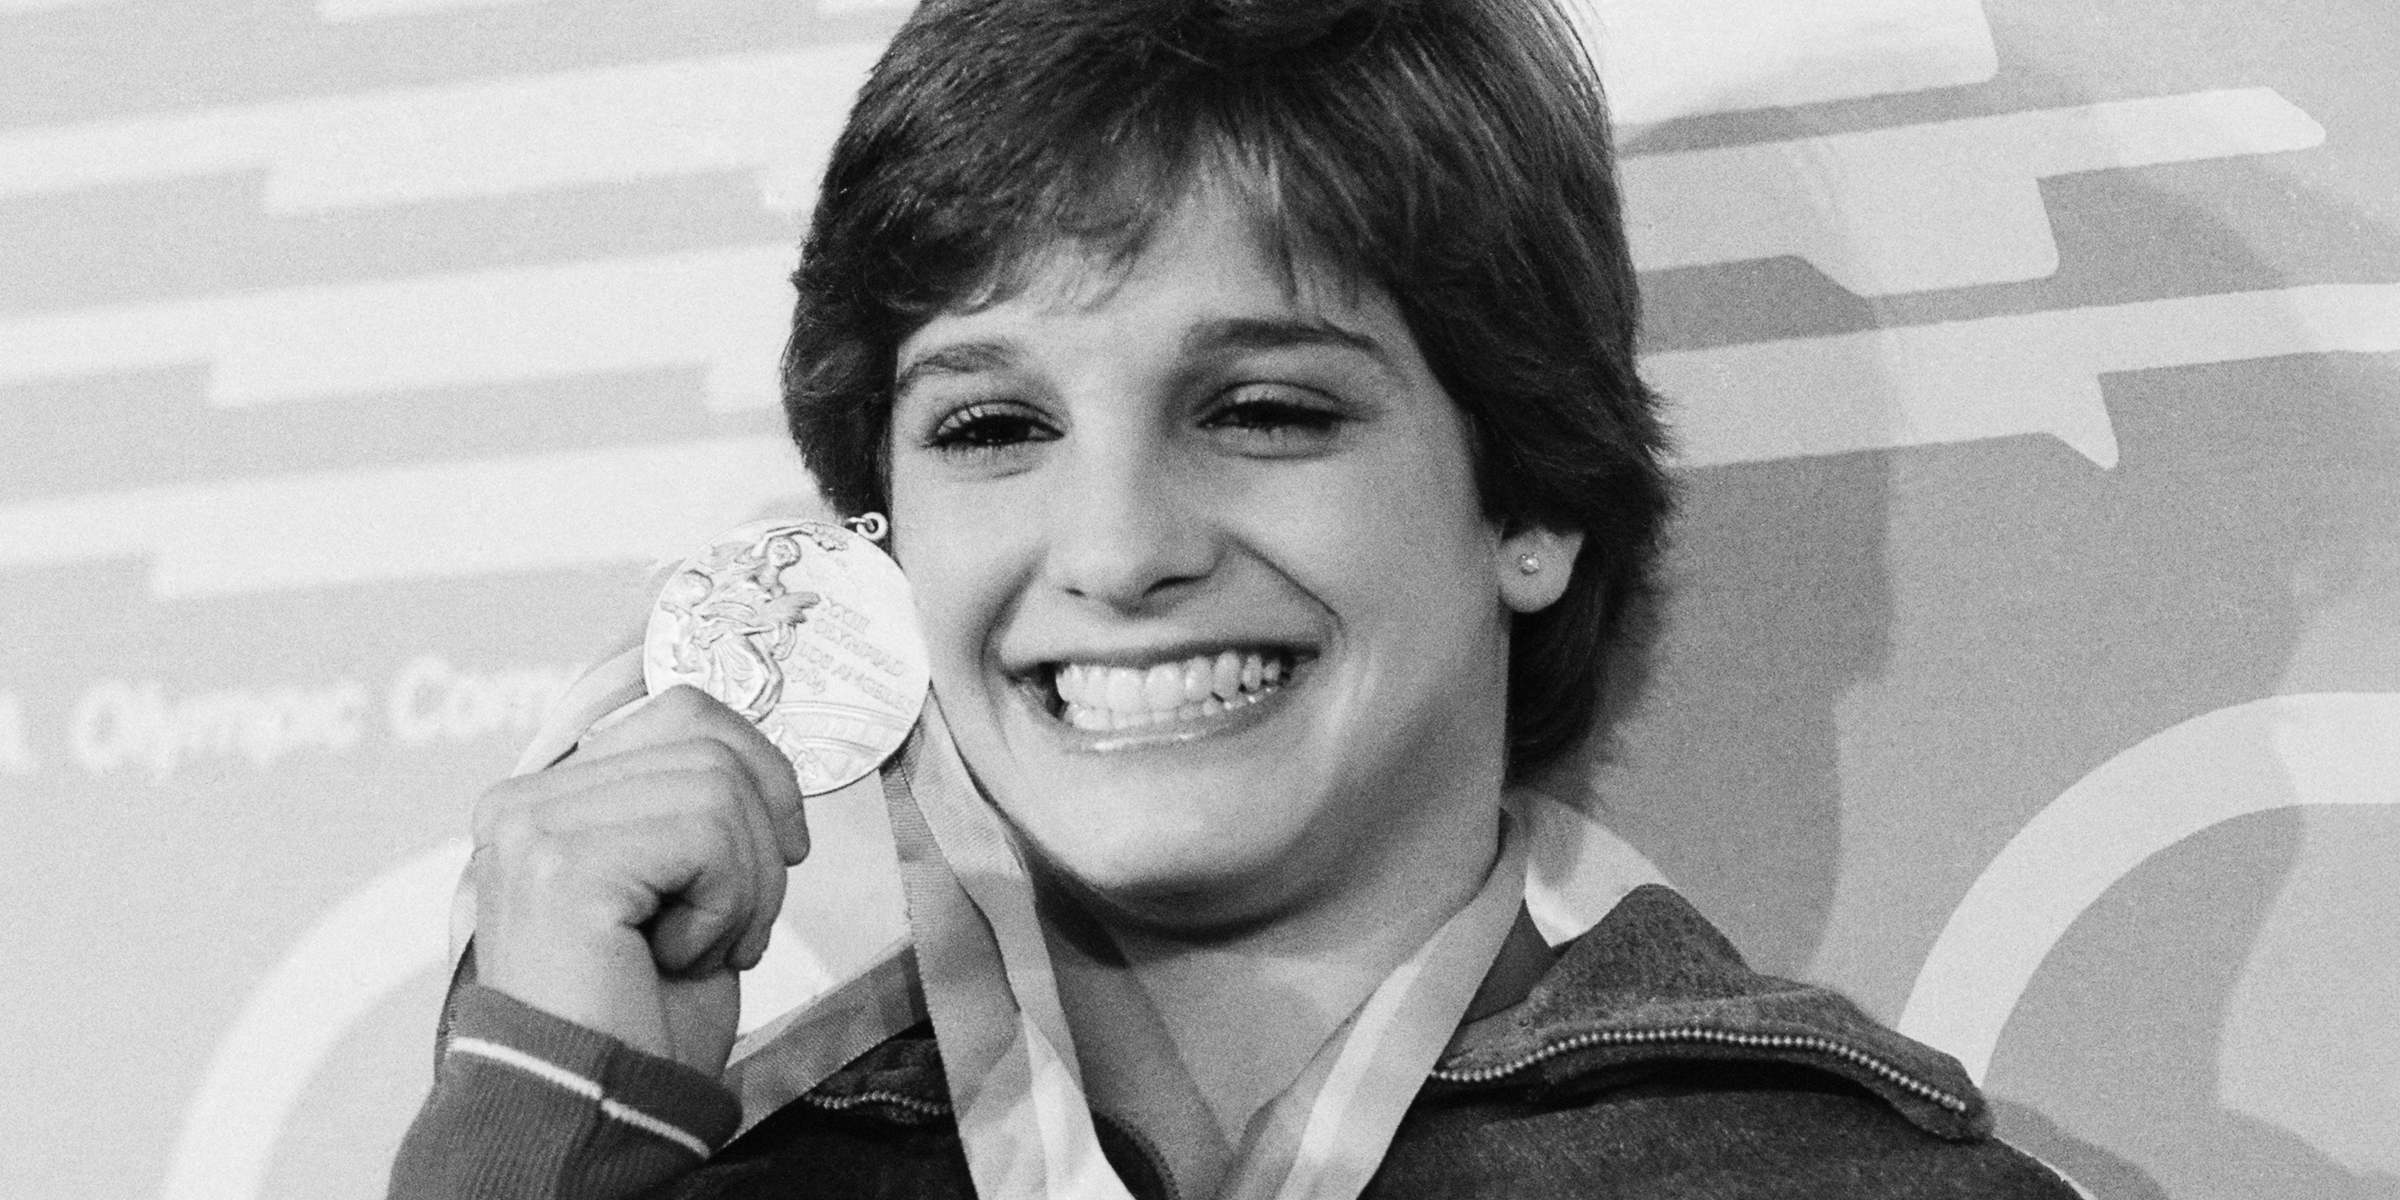 Mary Lou Retton | Source: Getty Images